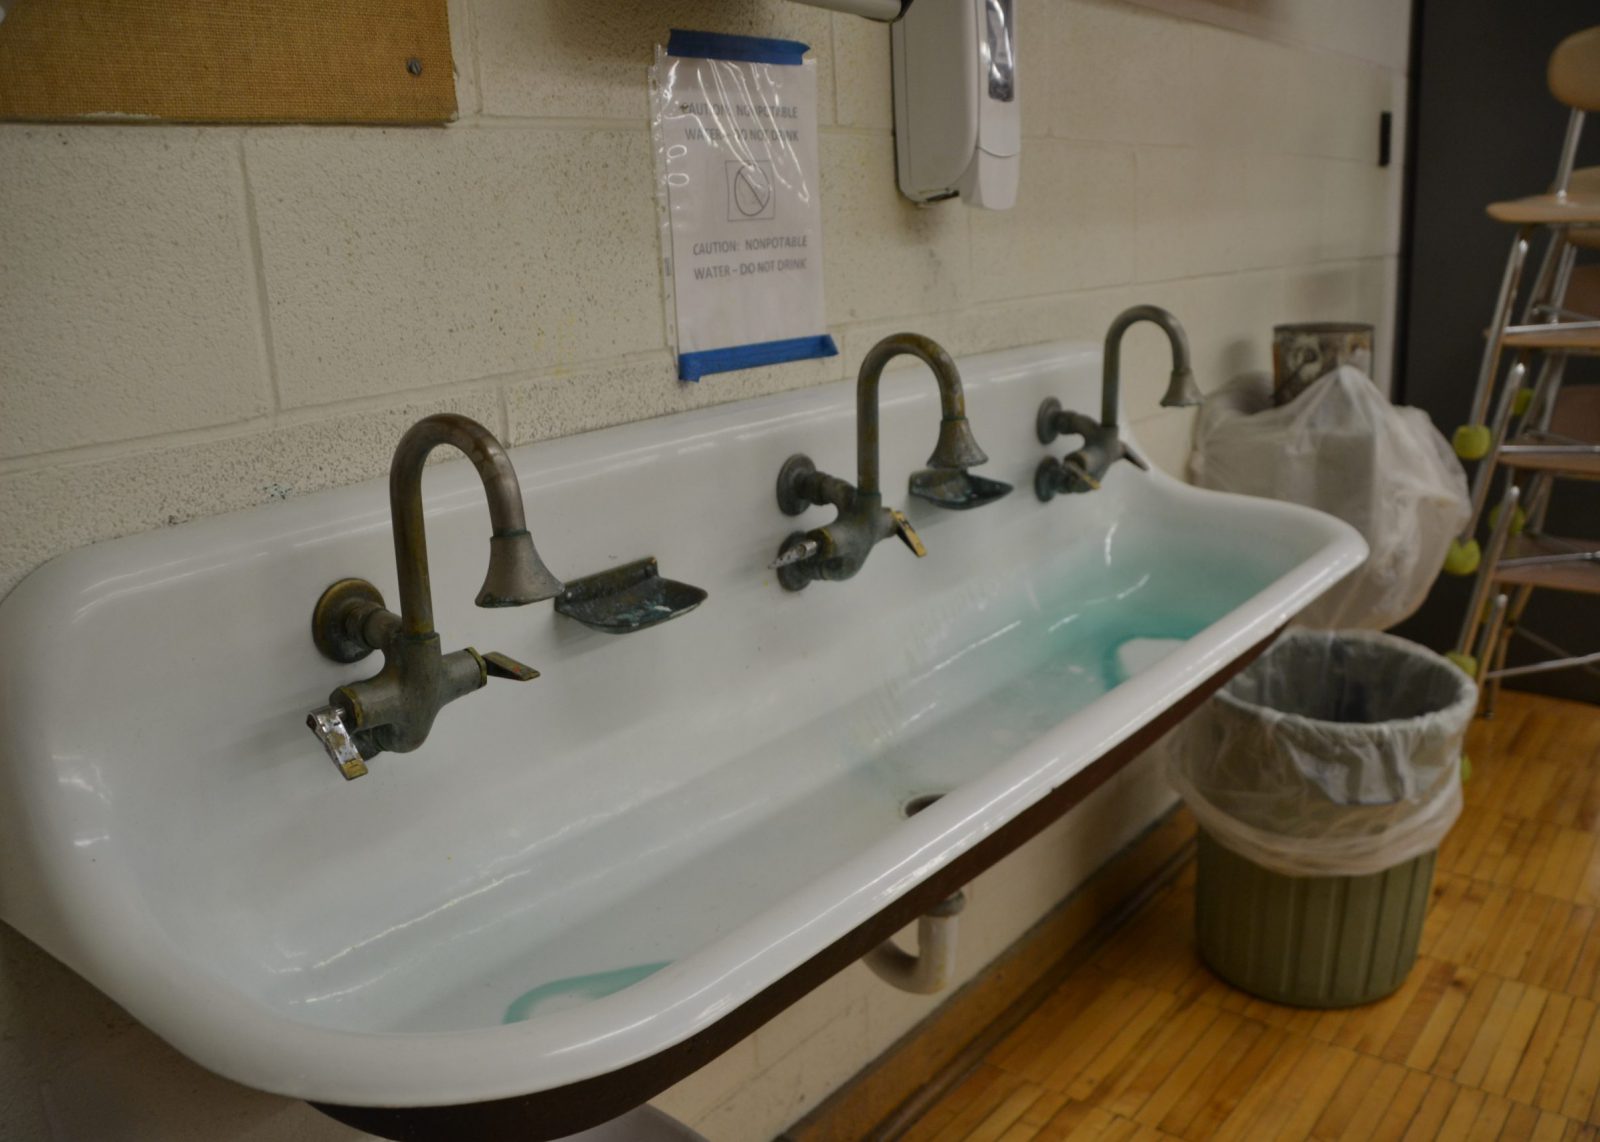 Old classroom sinks at Iroquois